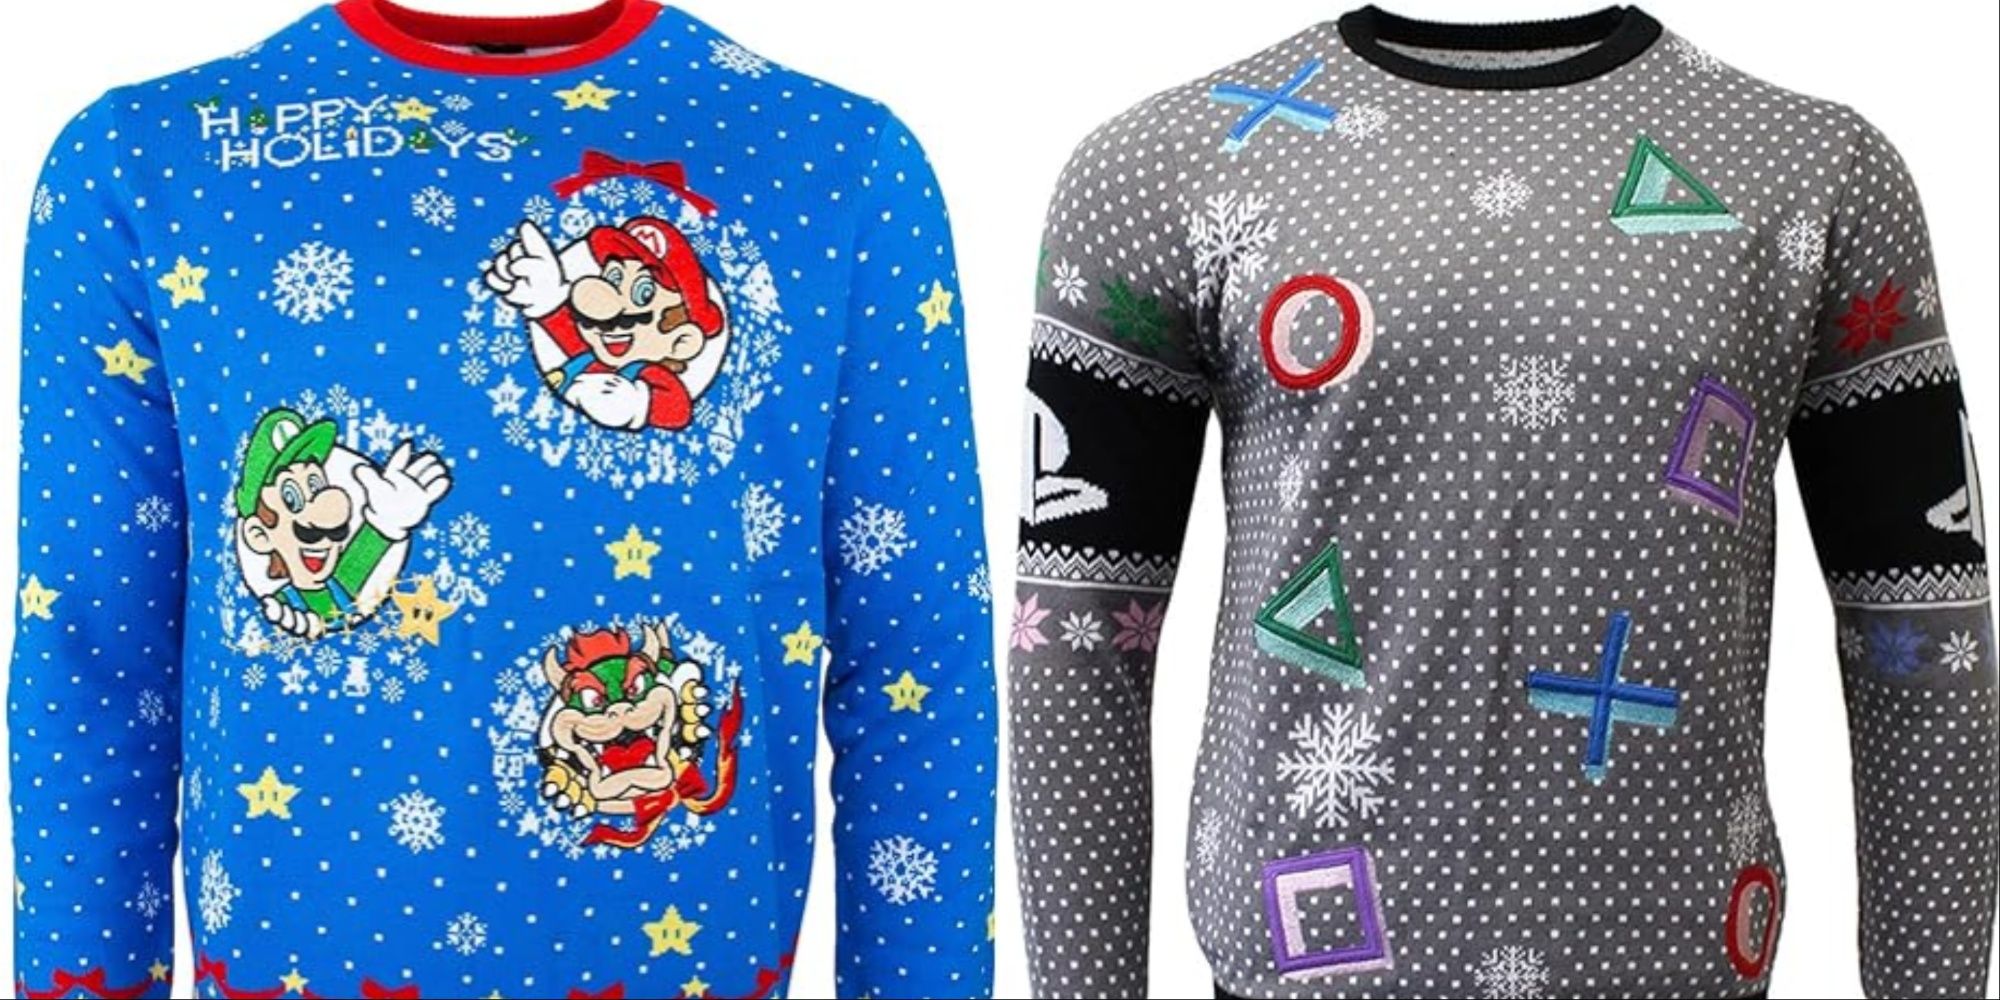 gaming christmas jumper featured image